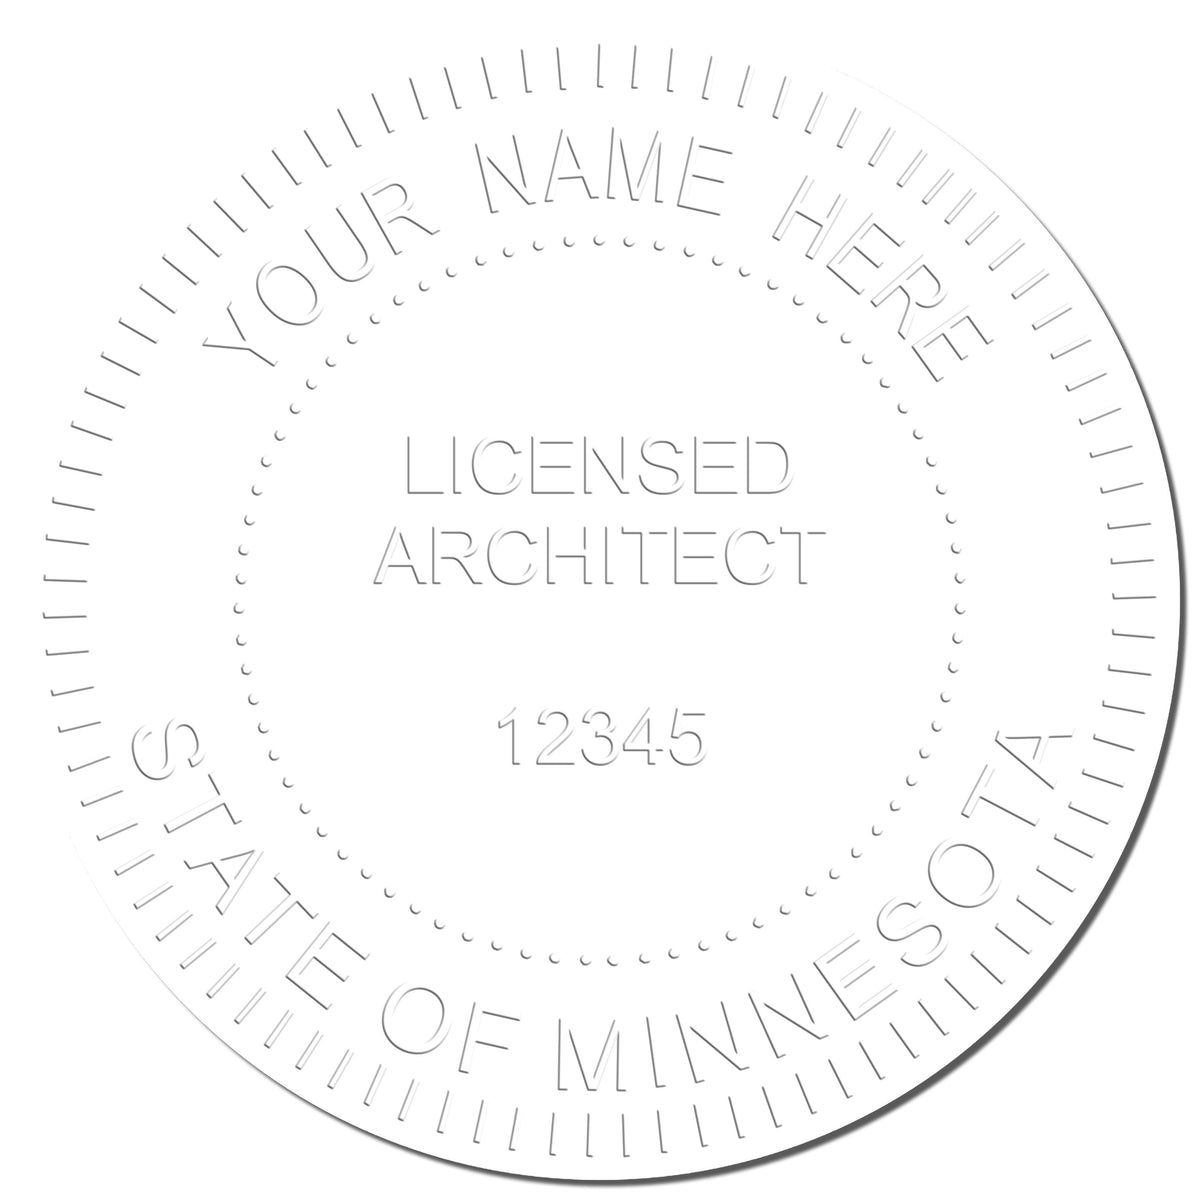 A photograph of the Minnesota Desk Architect Embossing Seal stamp impression reveals a vivid, professional image of the on paper.